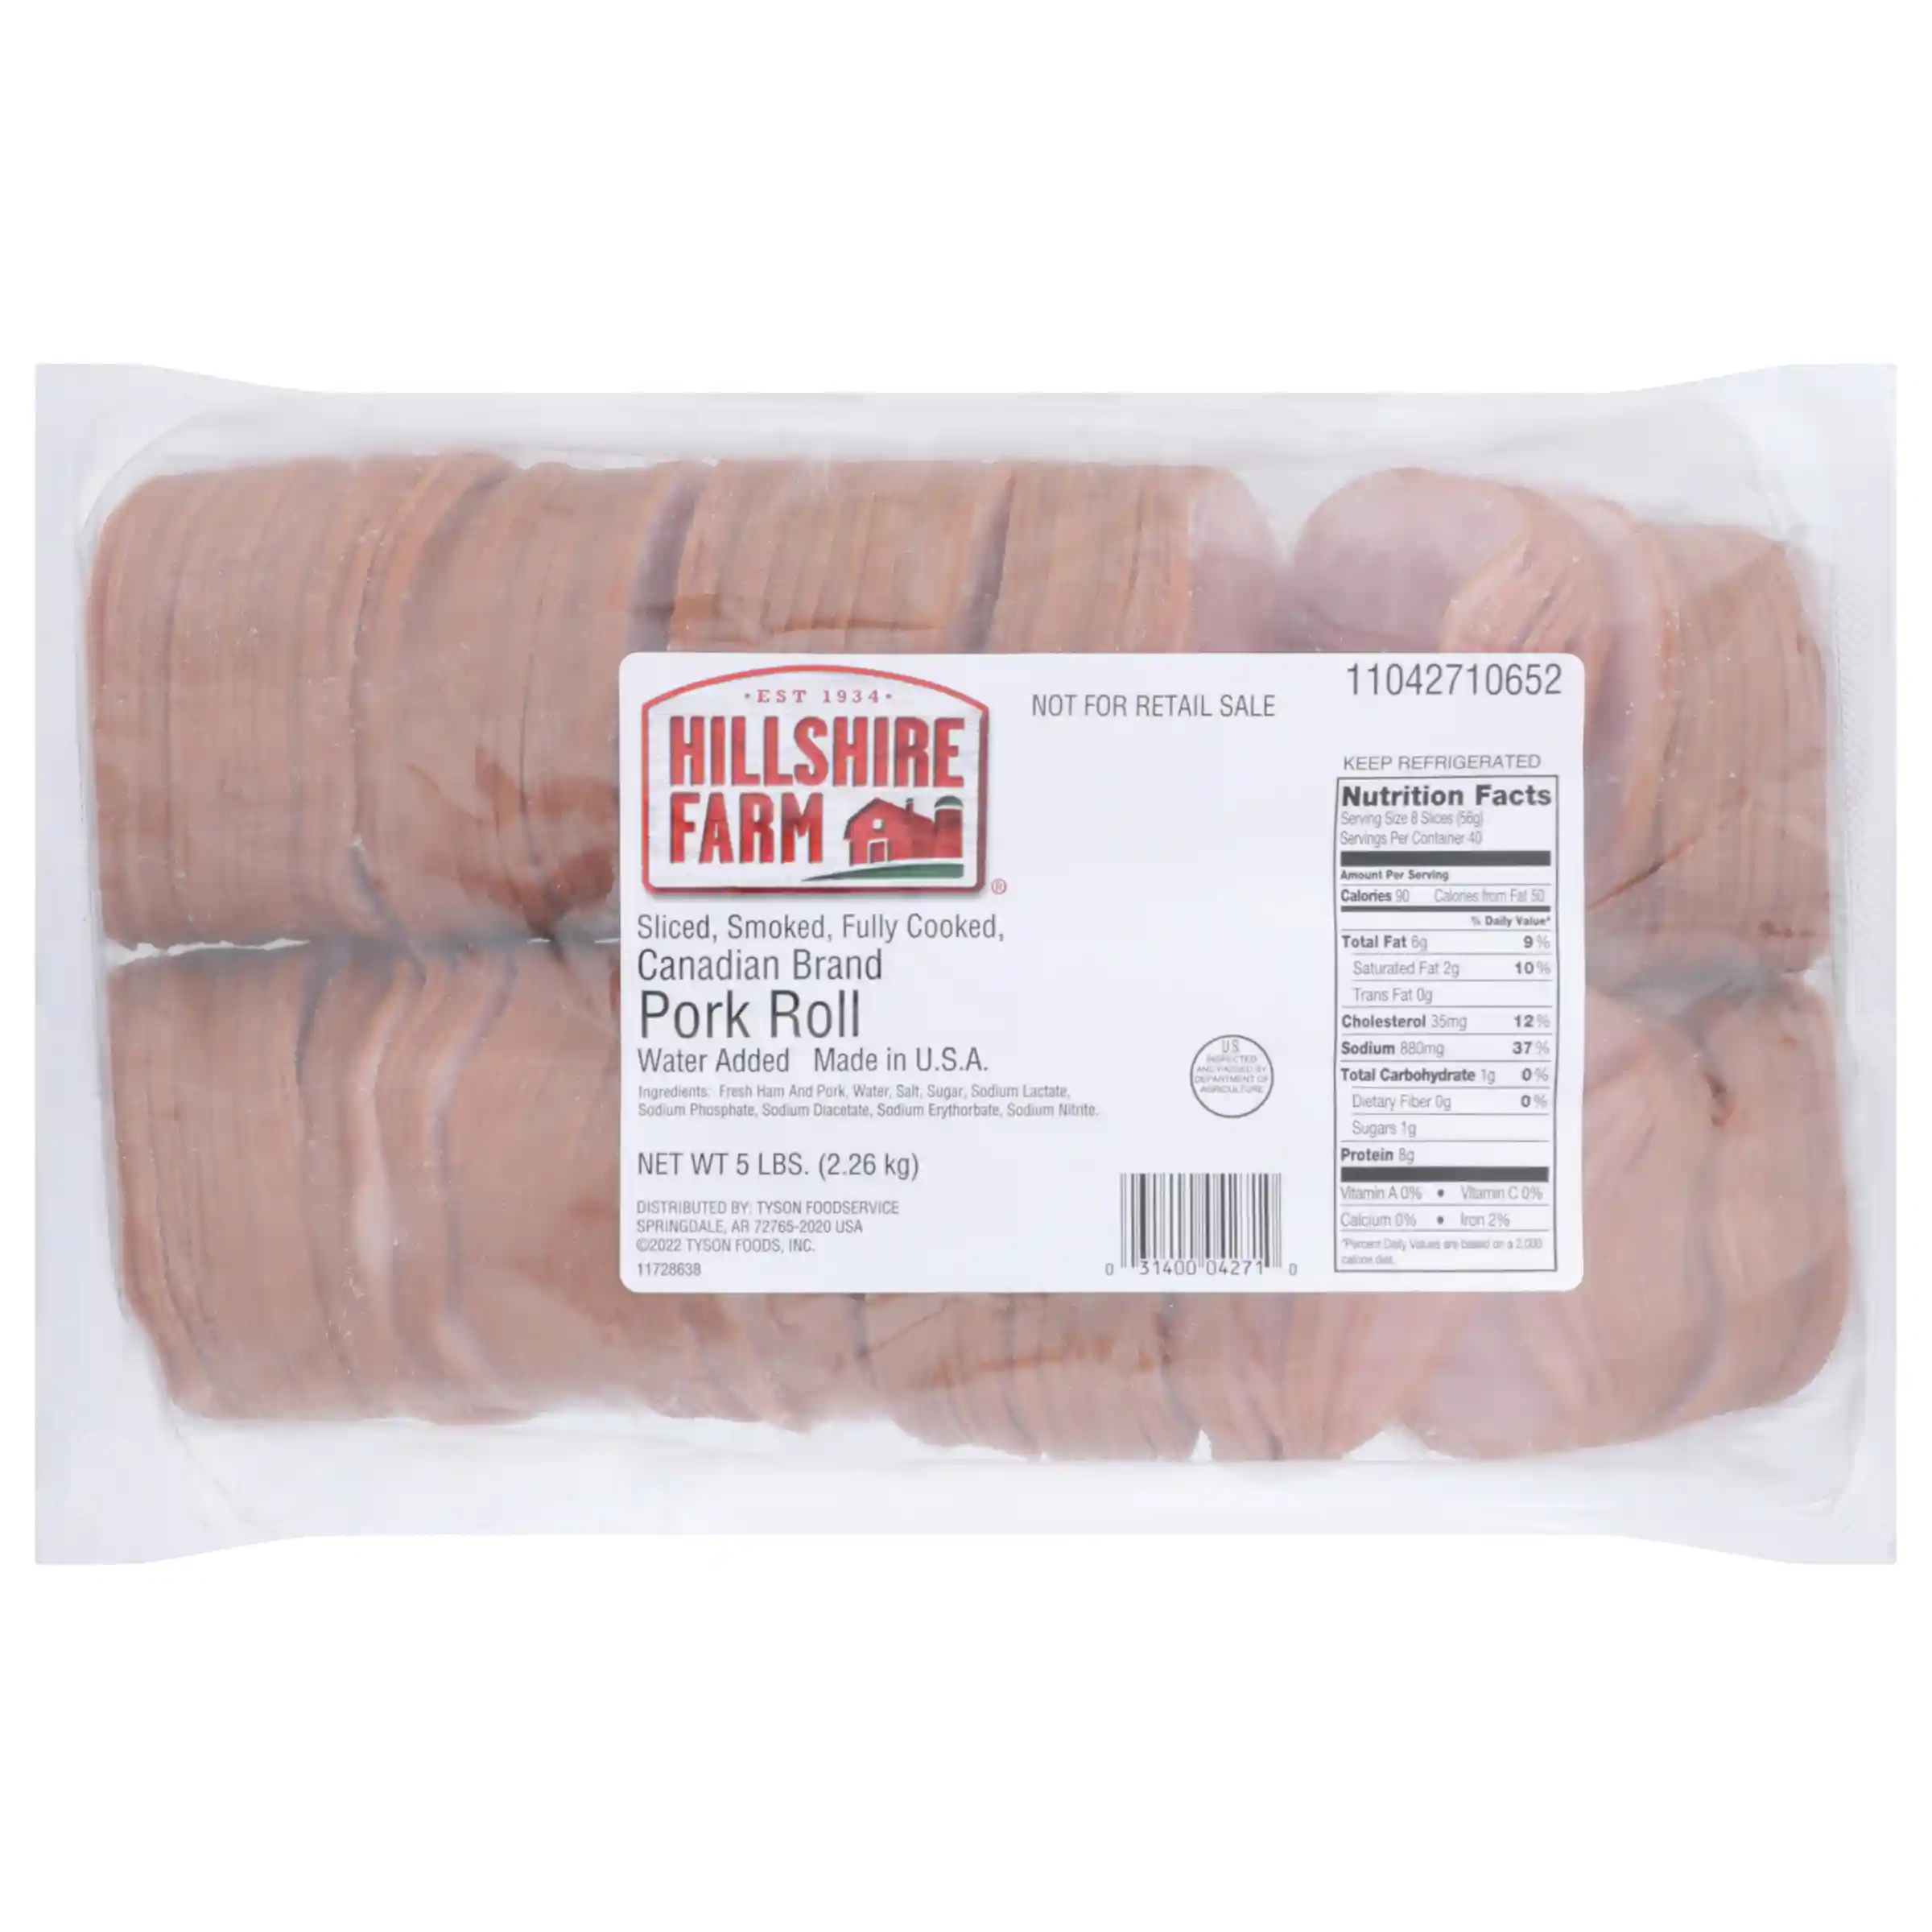 Hillshire Farm® Smoked Fully Cooked Sliced Canadian Brand Pork Roll_image_21